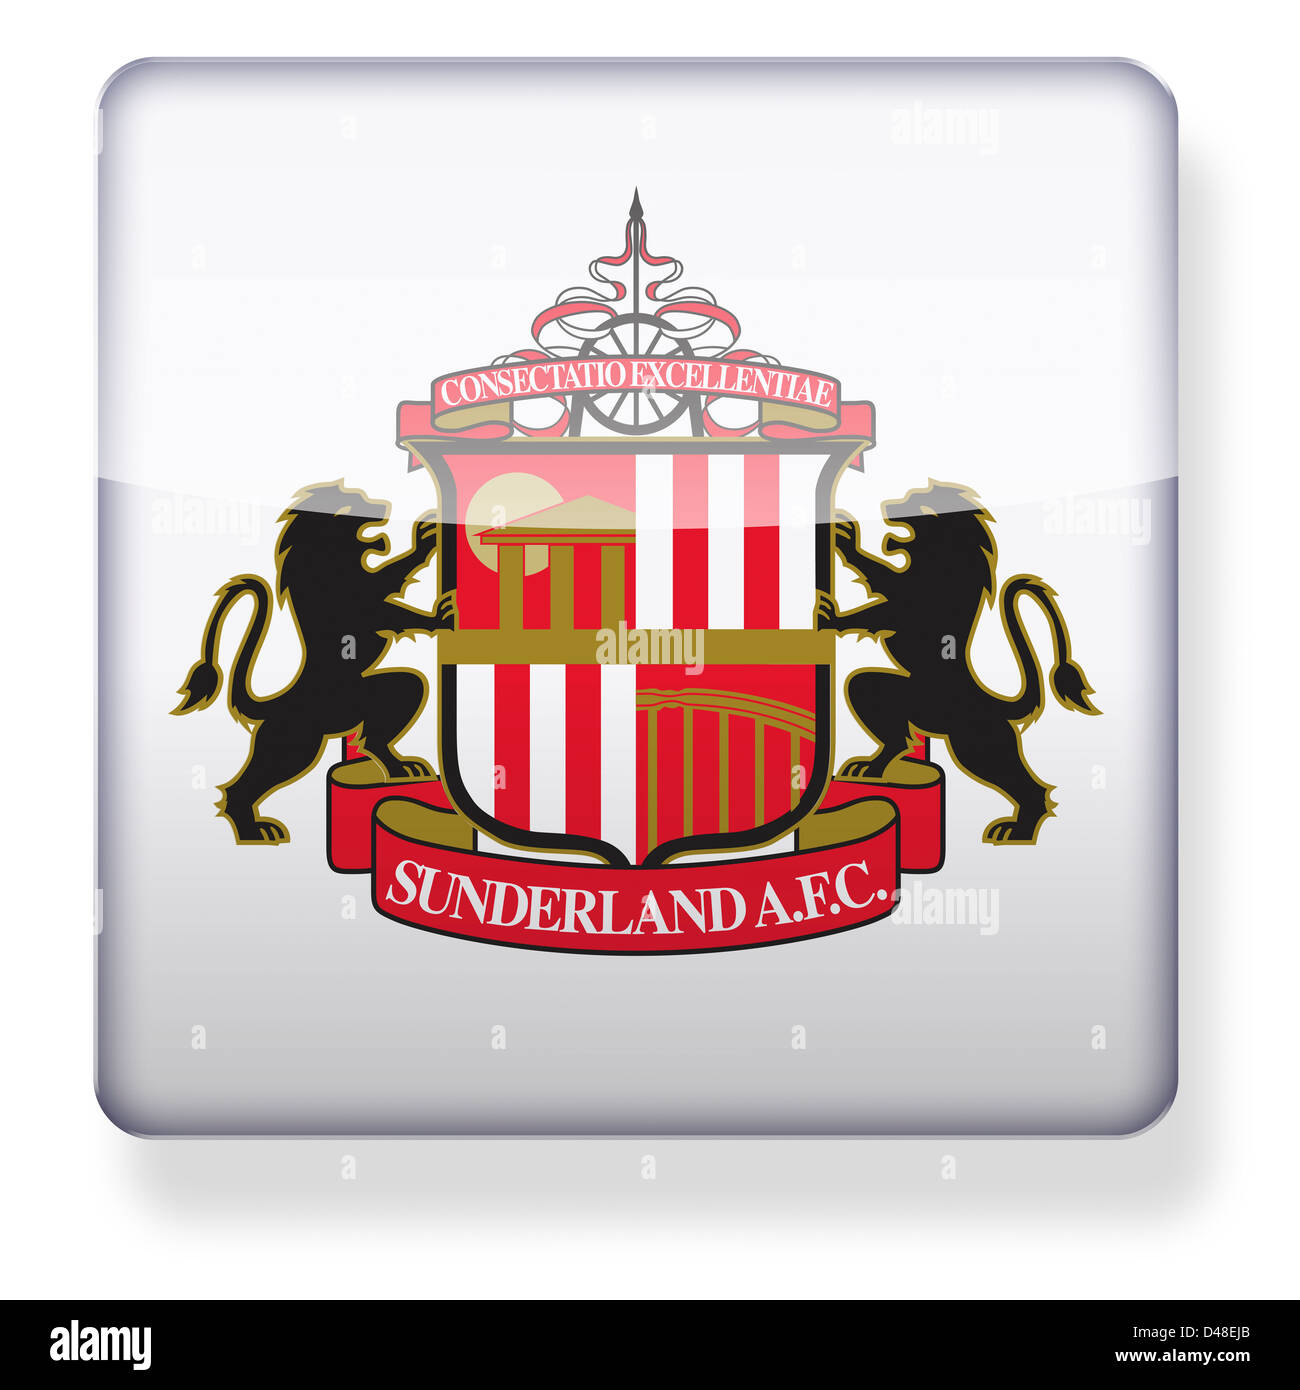 Sunderland football club logo as an app icon. Clipping path included. Stock Photo